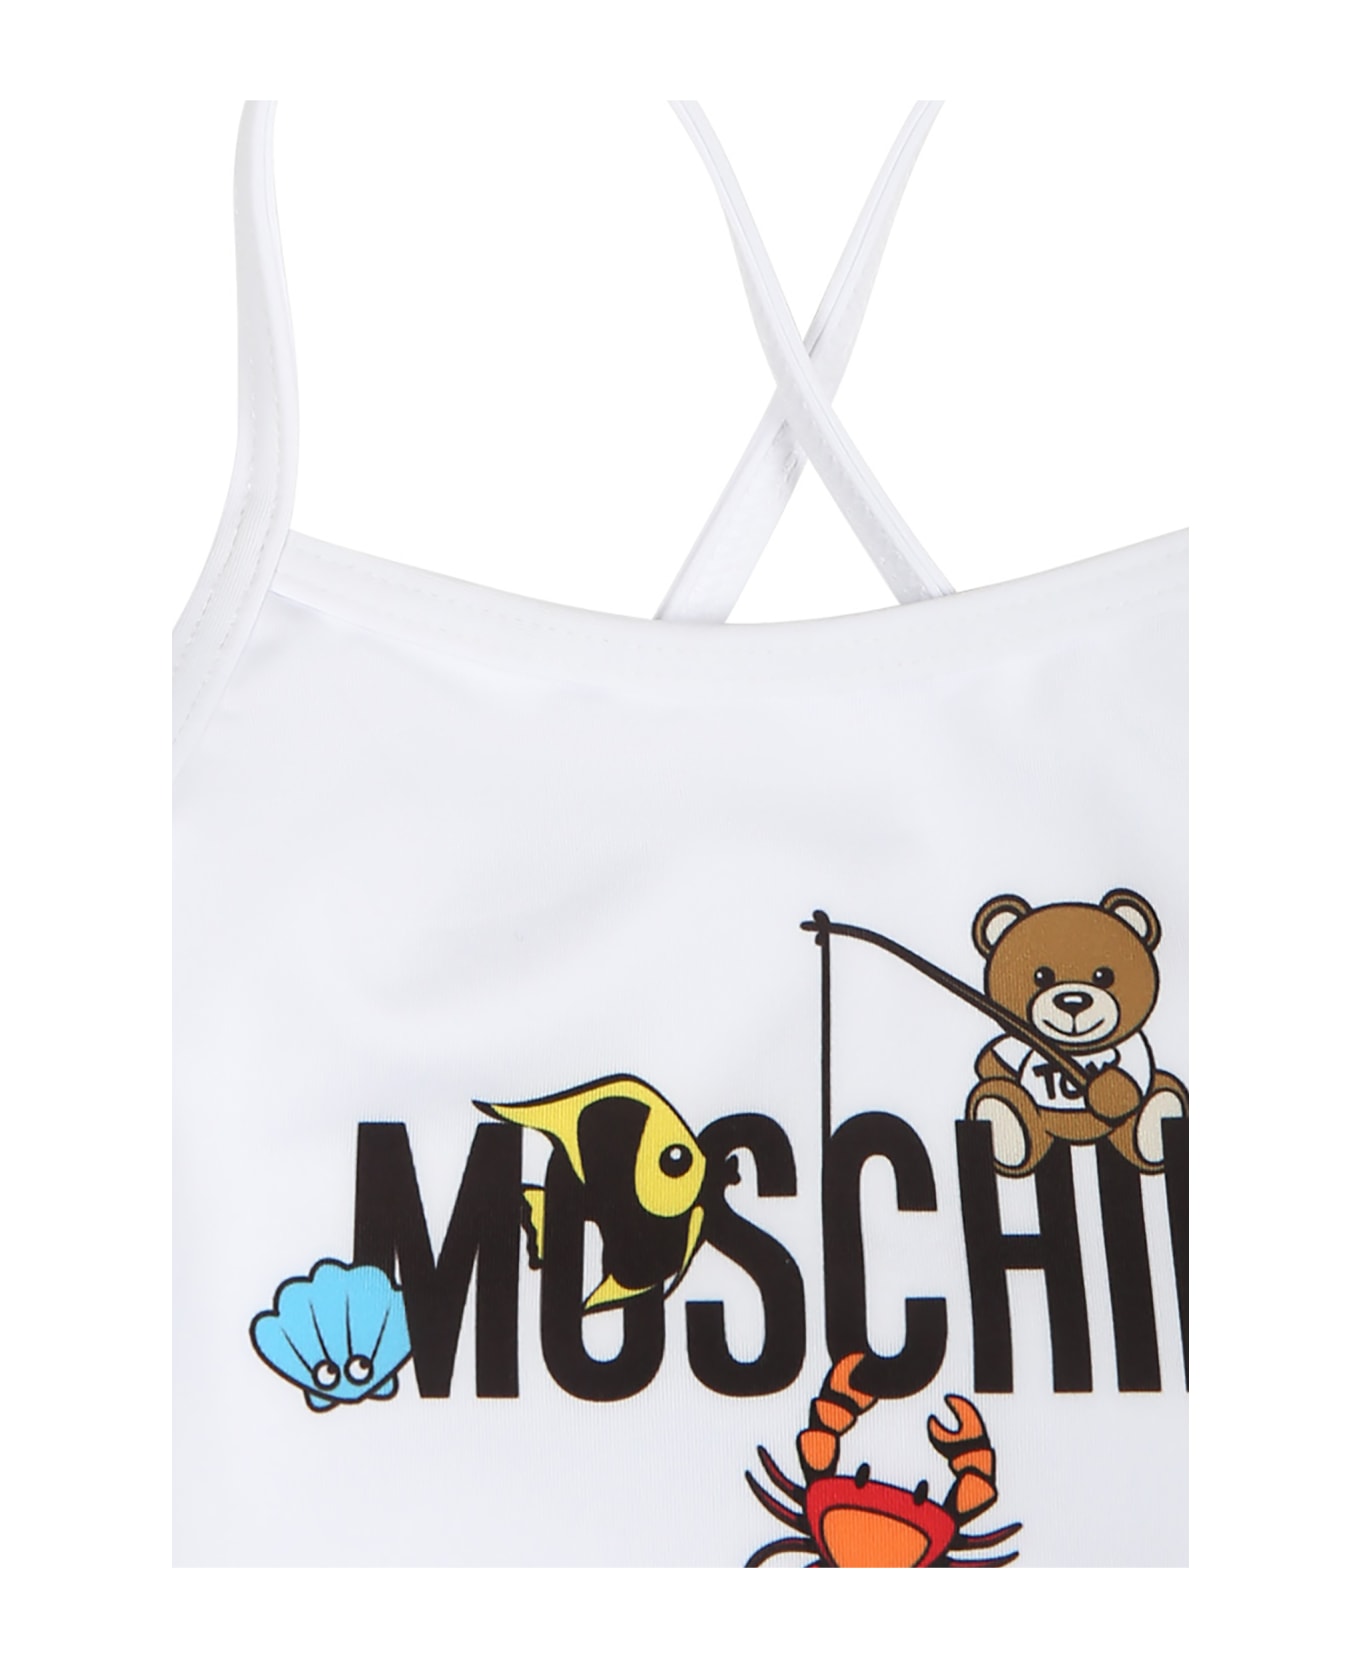 Moschino White One Piece Swimsuit For Baby Girl With Logo - White